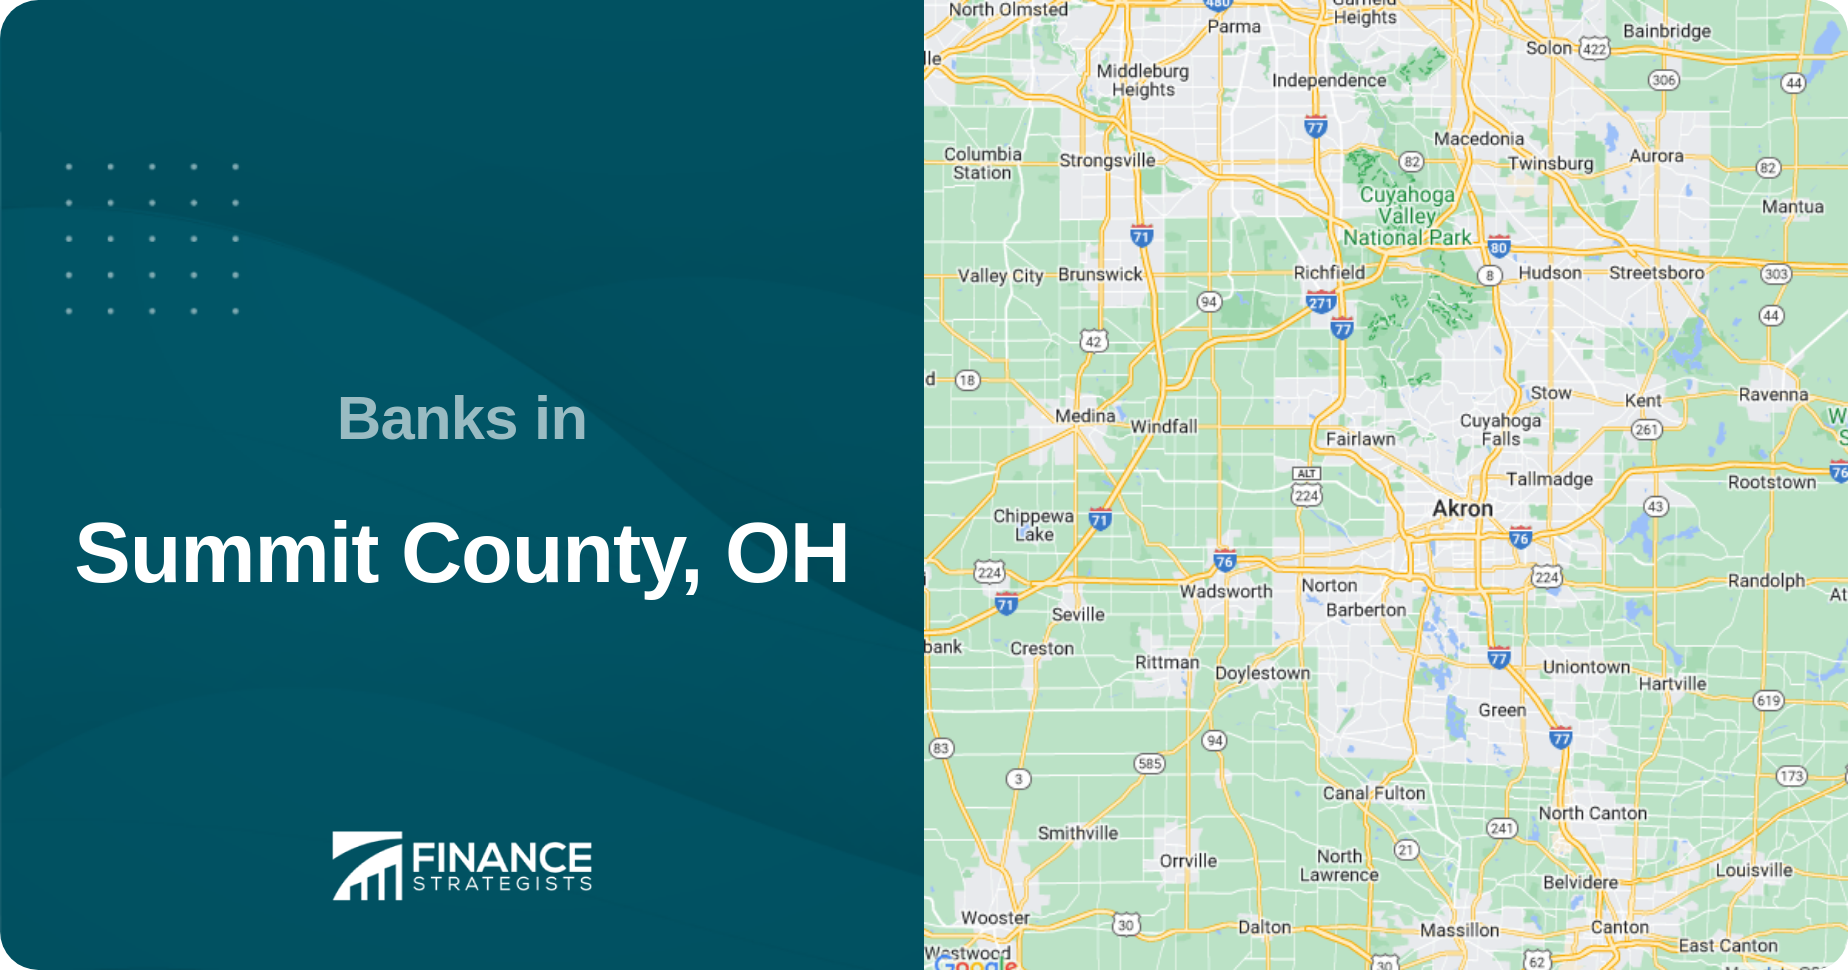 Banks in Summit County, OH